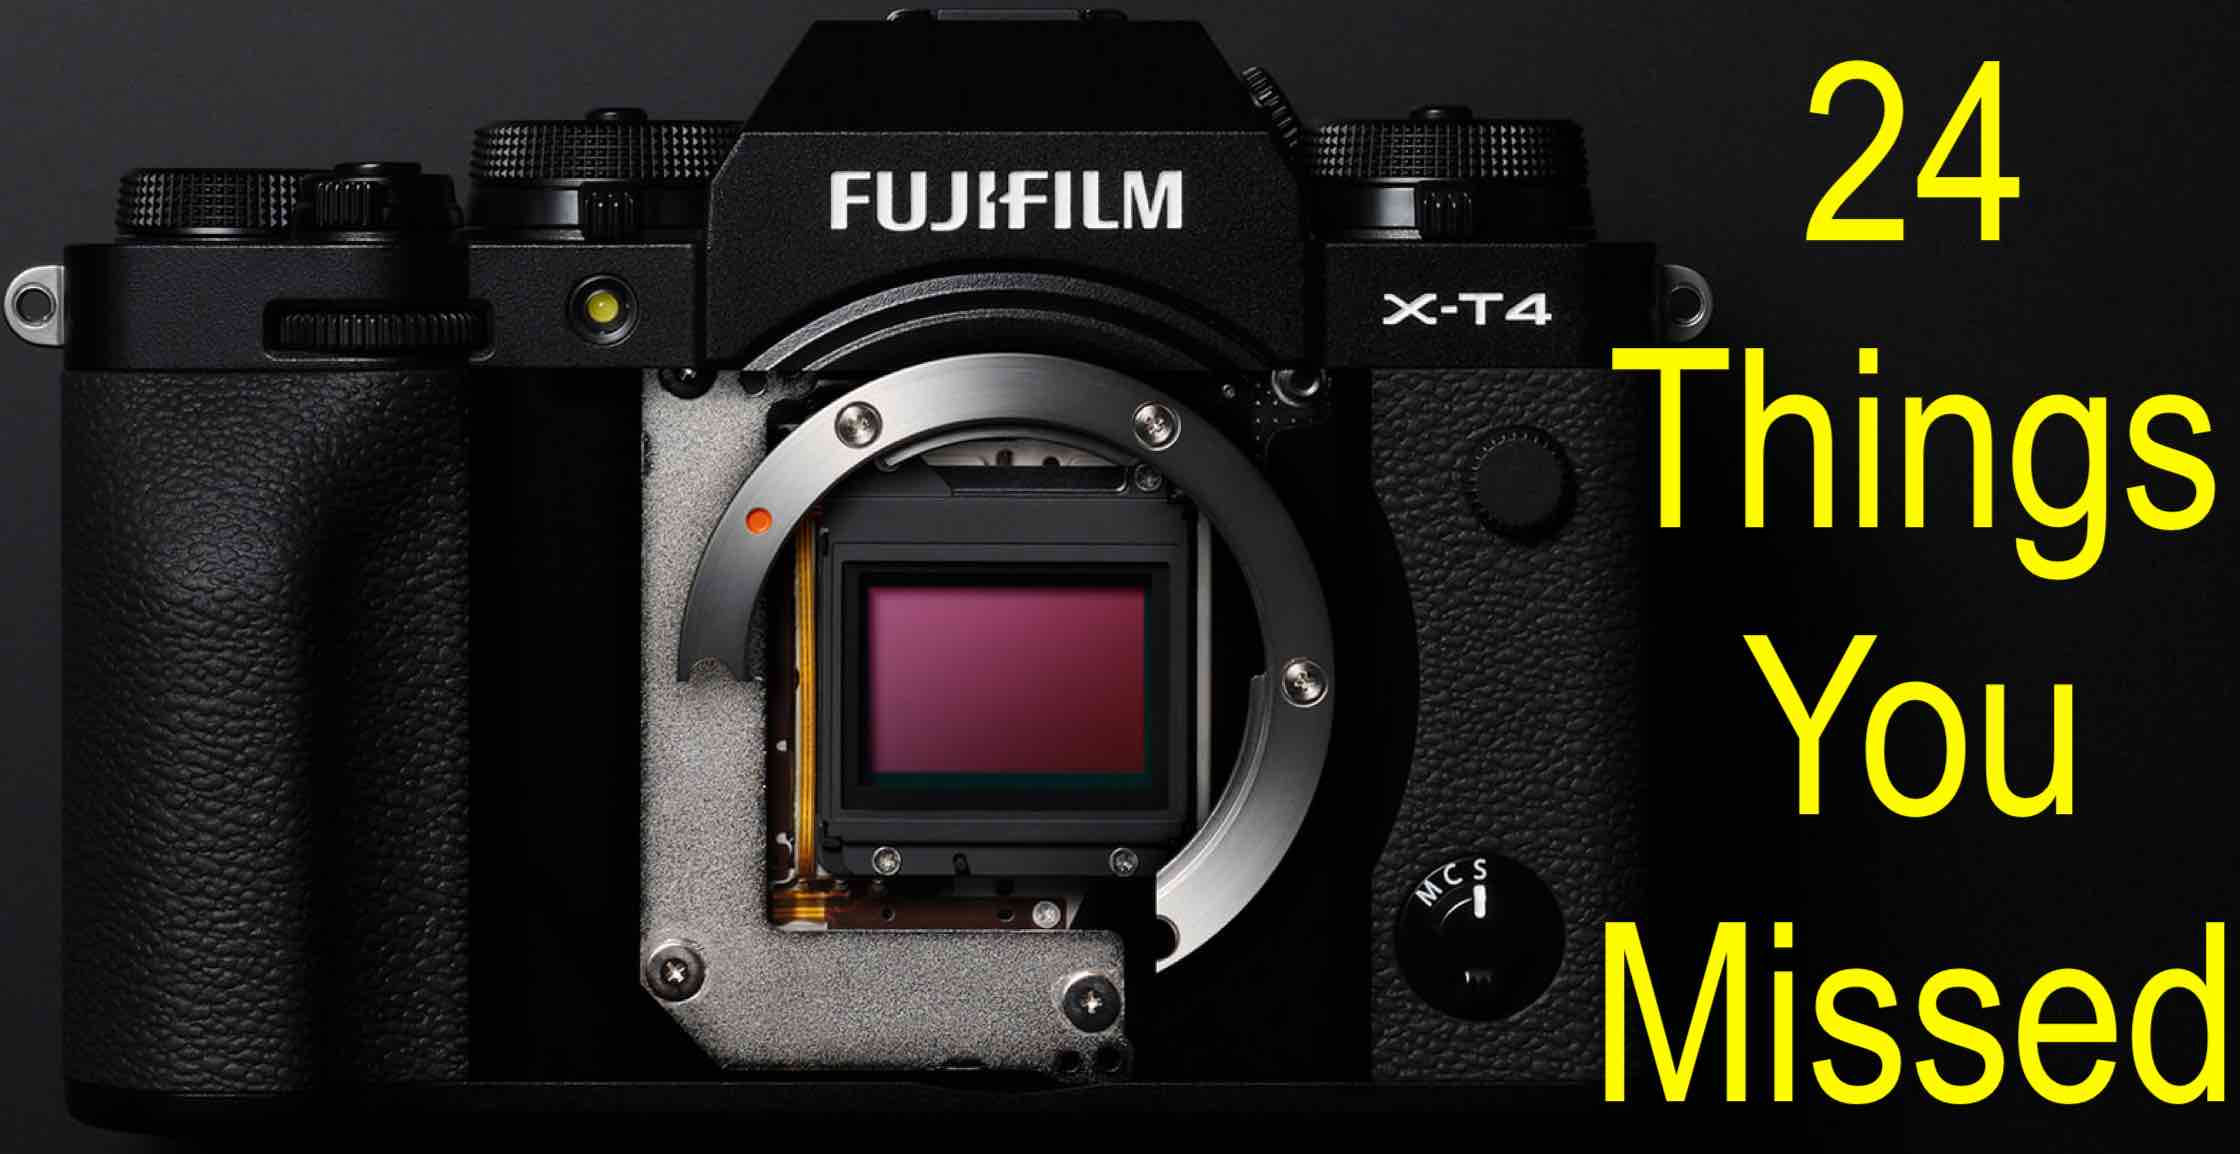 Fujifilm X-T4 for Video :: Everything you need to know! 